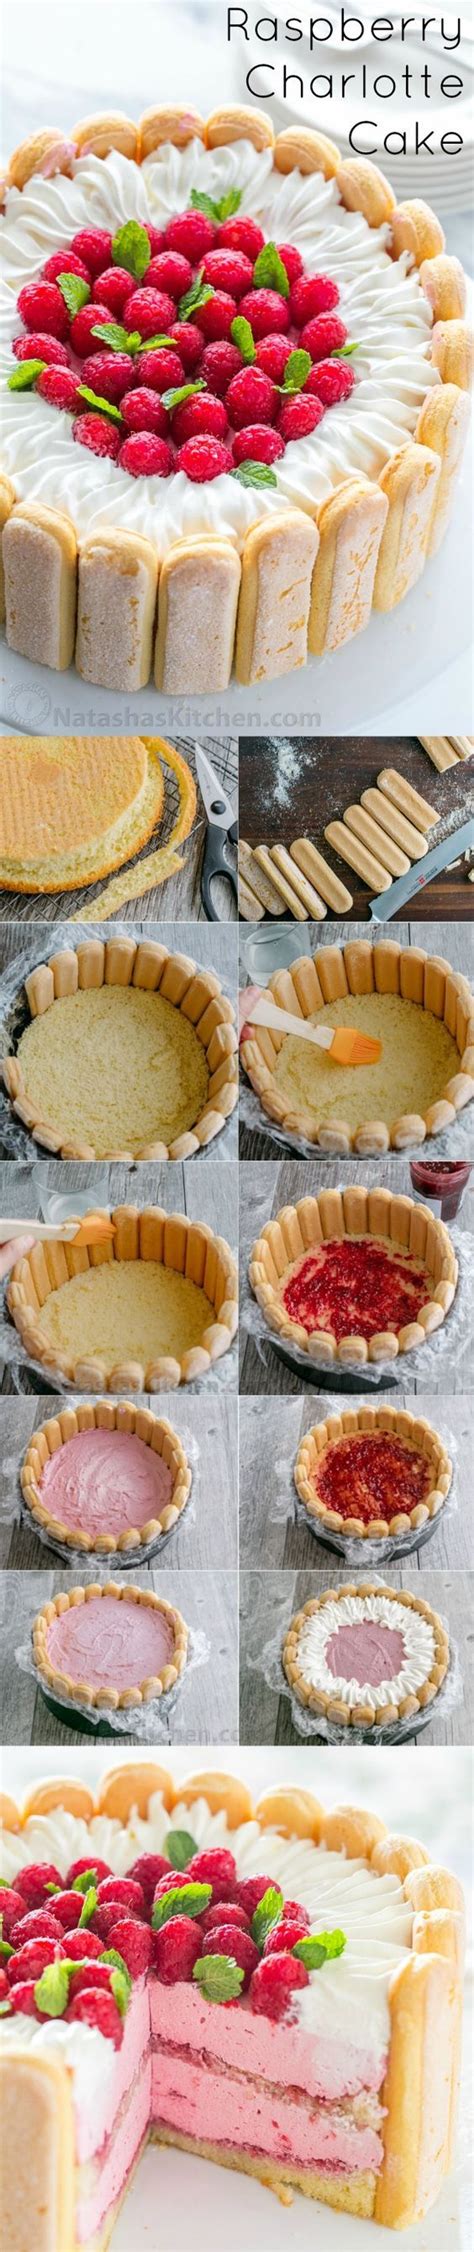 They're known as lady fingers or sponge fingers in many countries. Check out Charlotte Cake Recipe with Raspberries. It's so ...